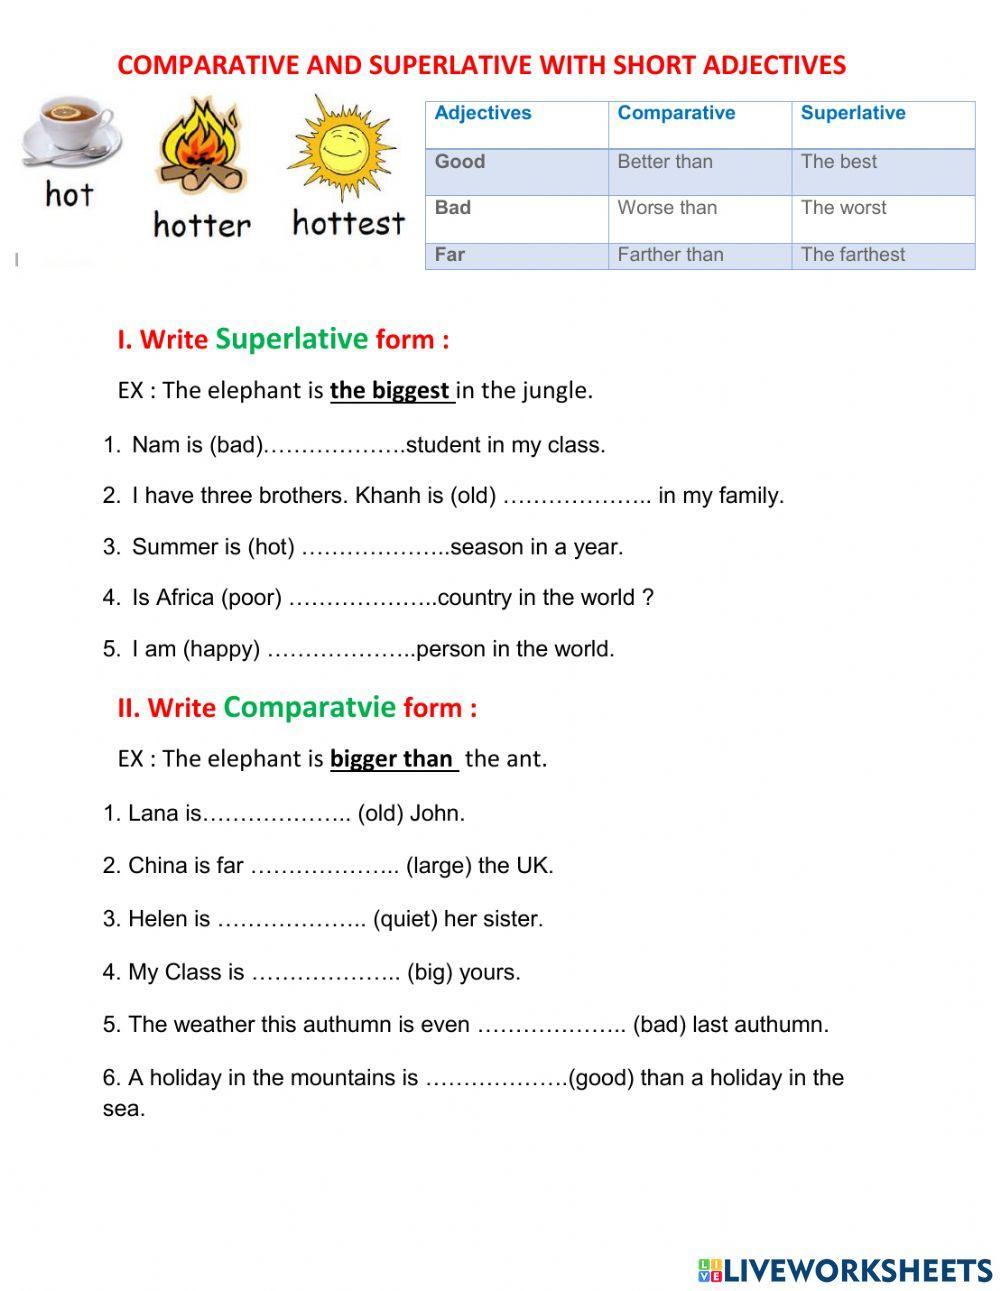 Comparative with short adjectives interactive worksheet | Live Worksheets